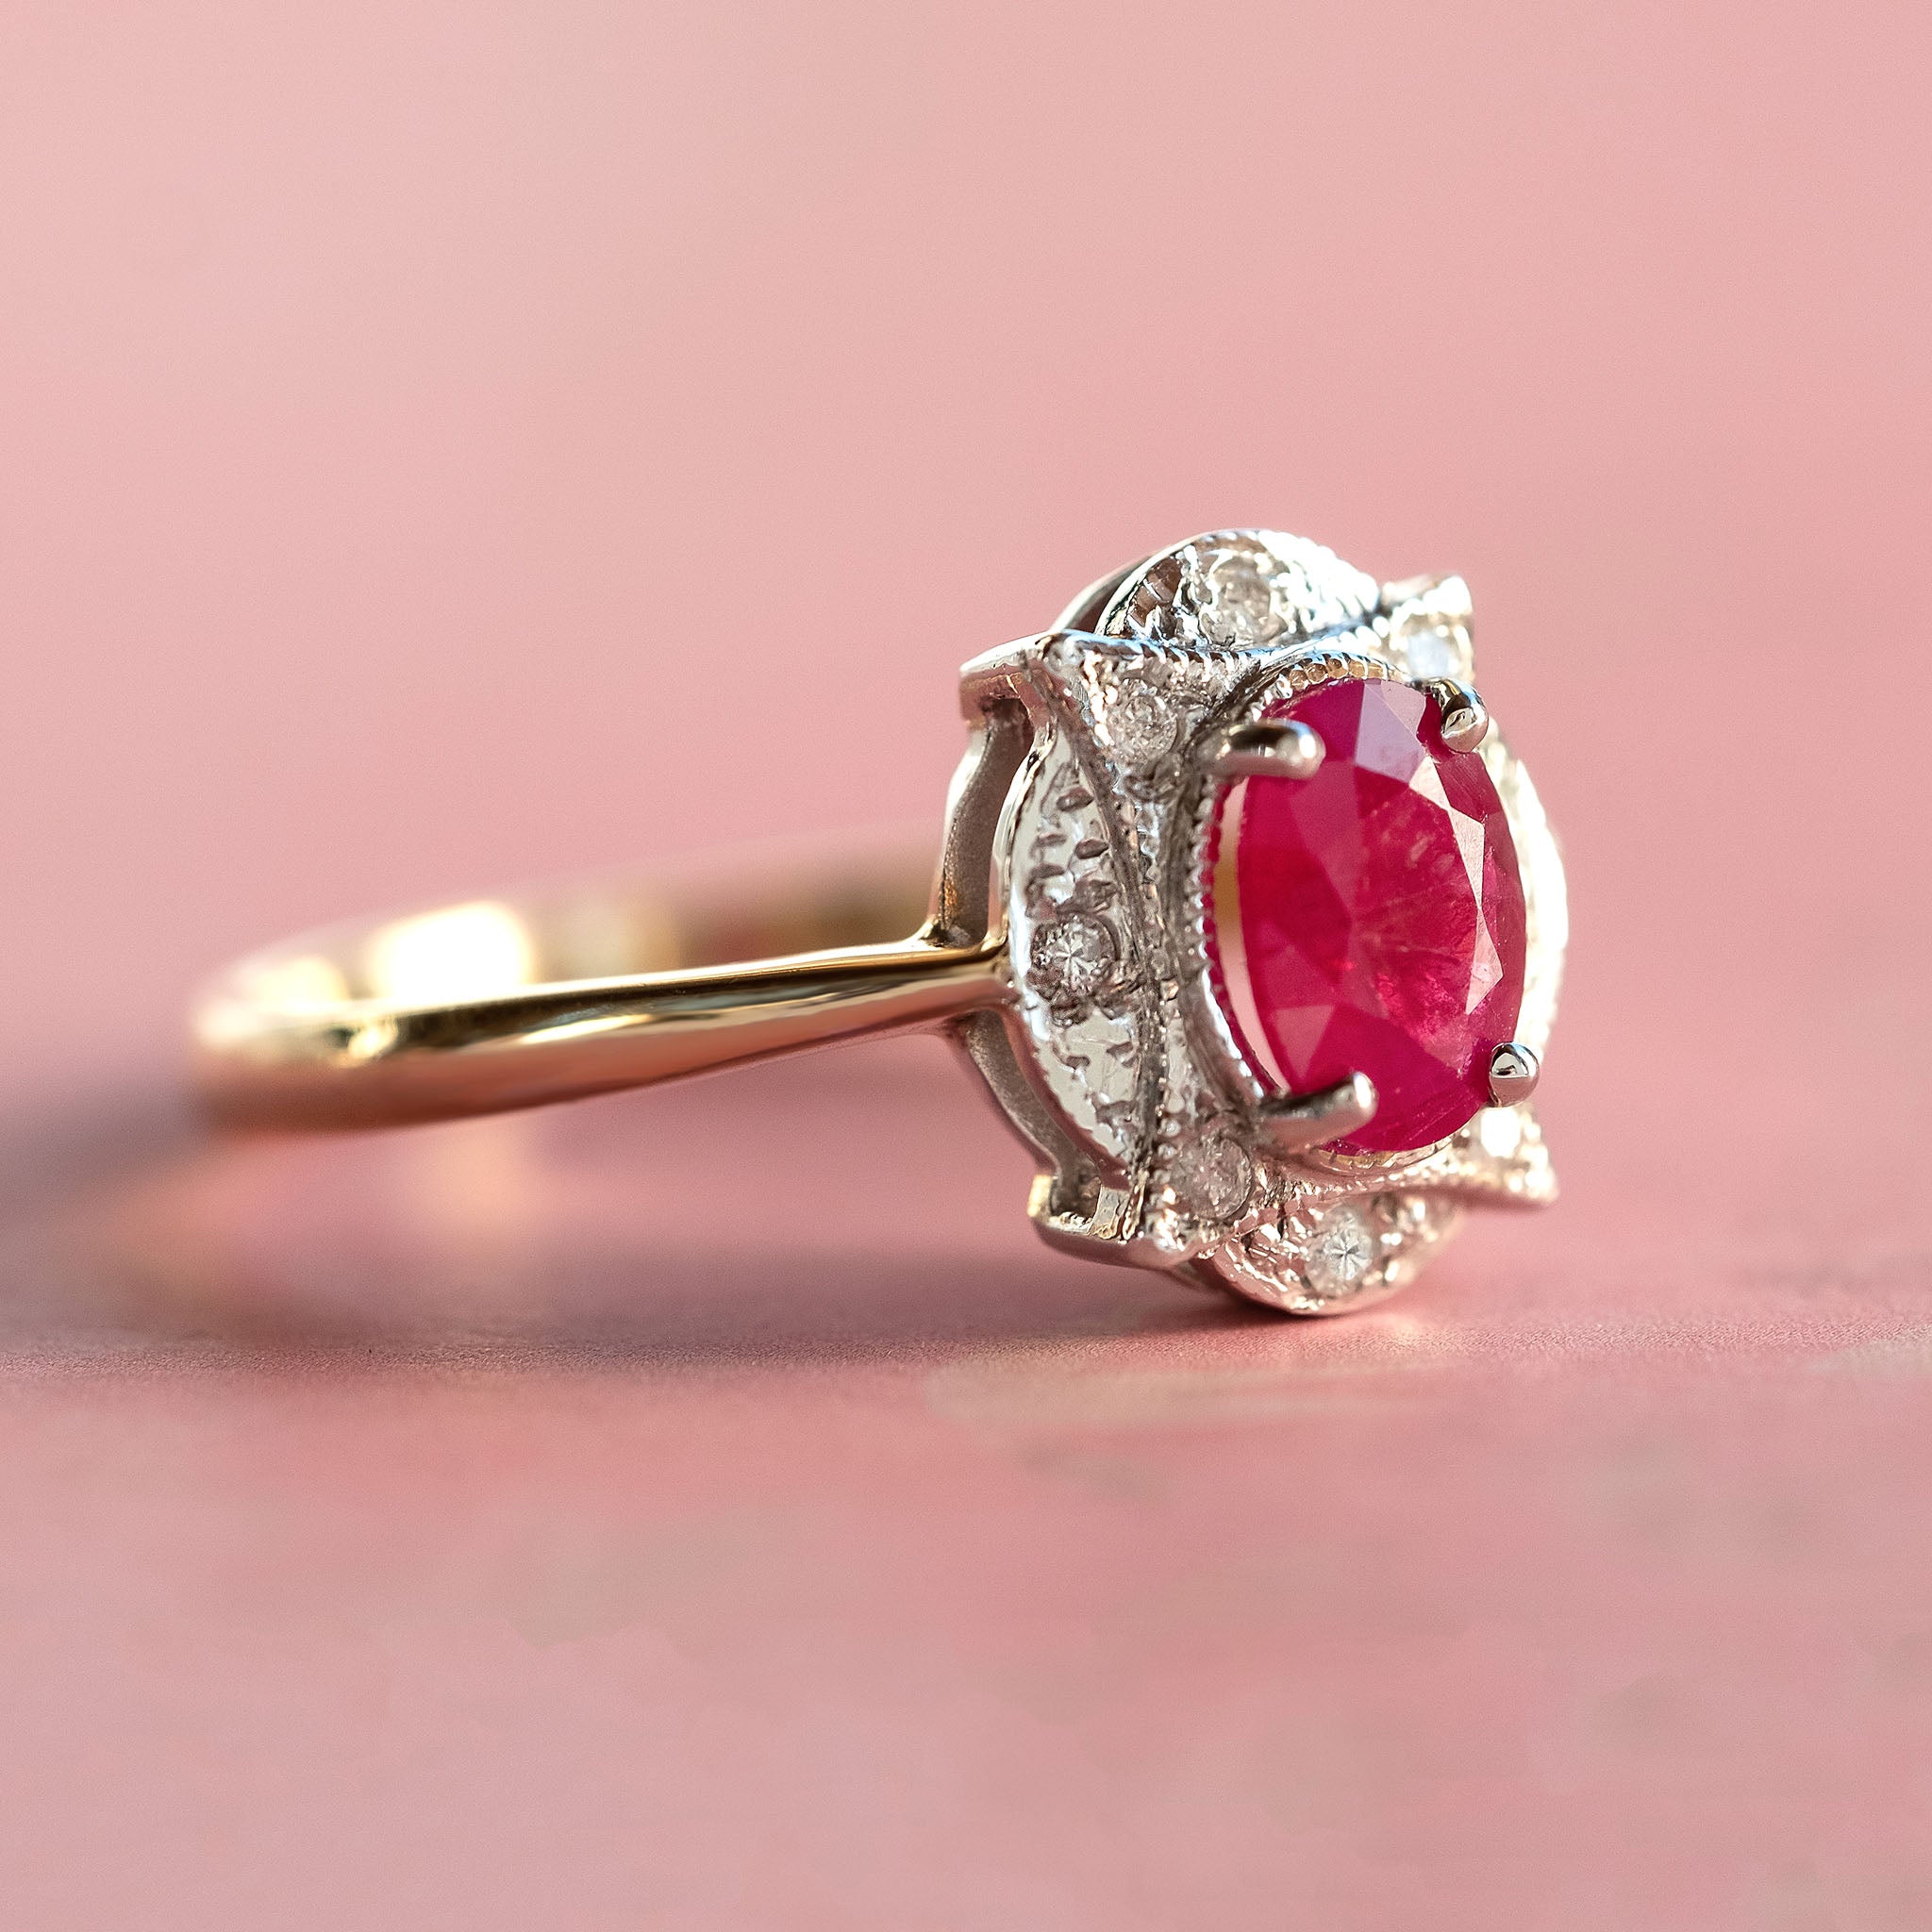 Vintage style ruby and diamond ring